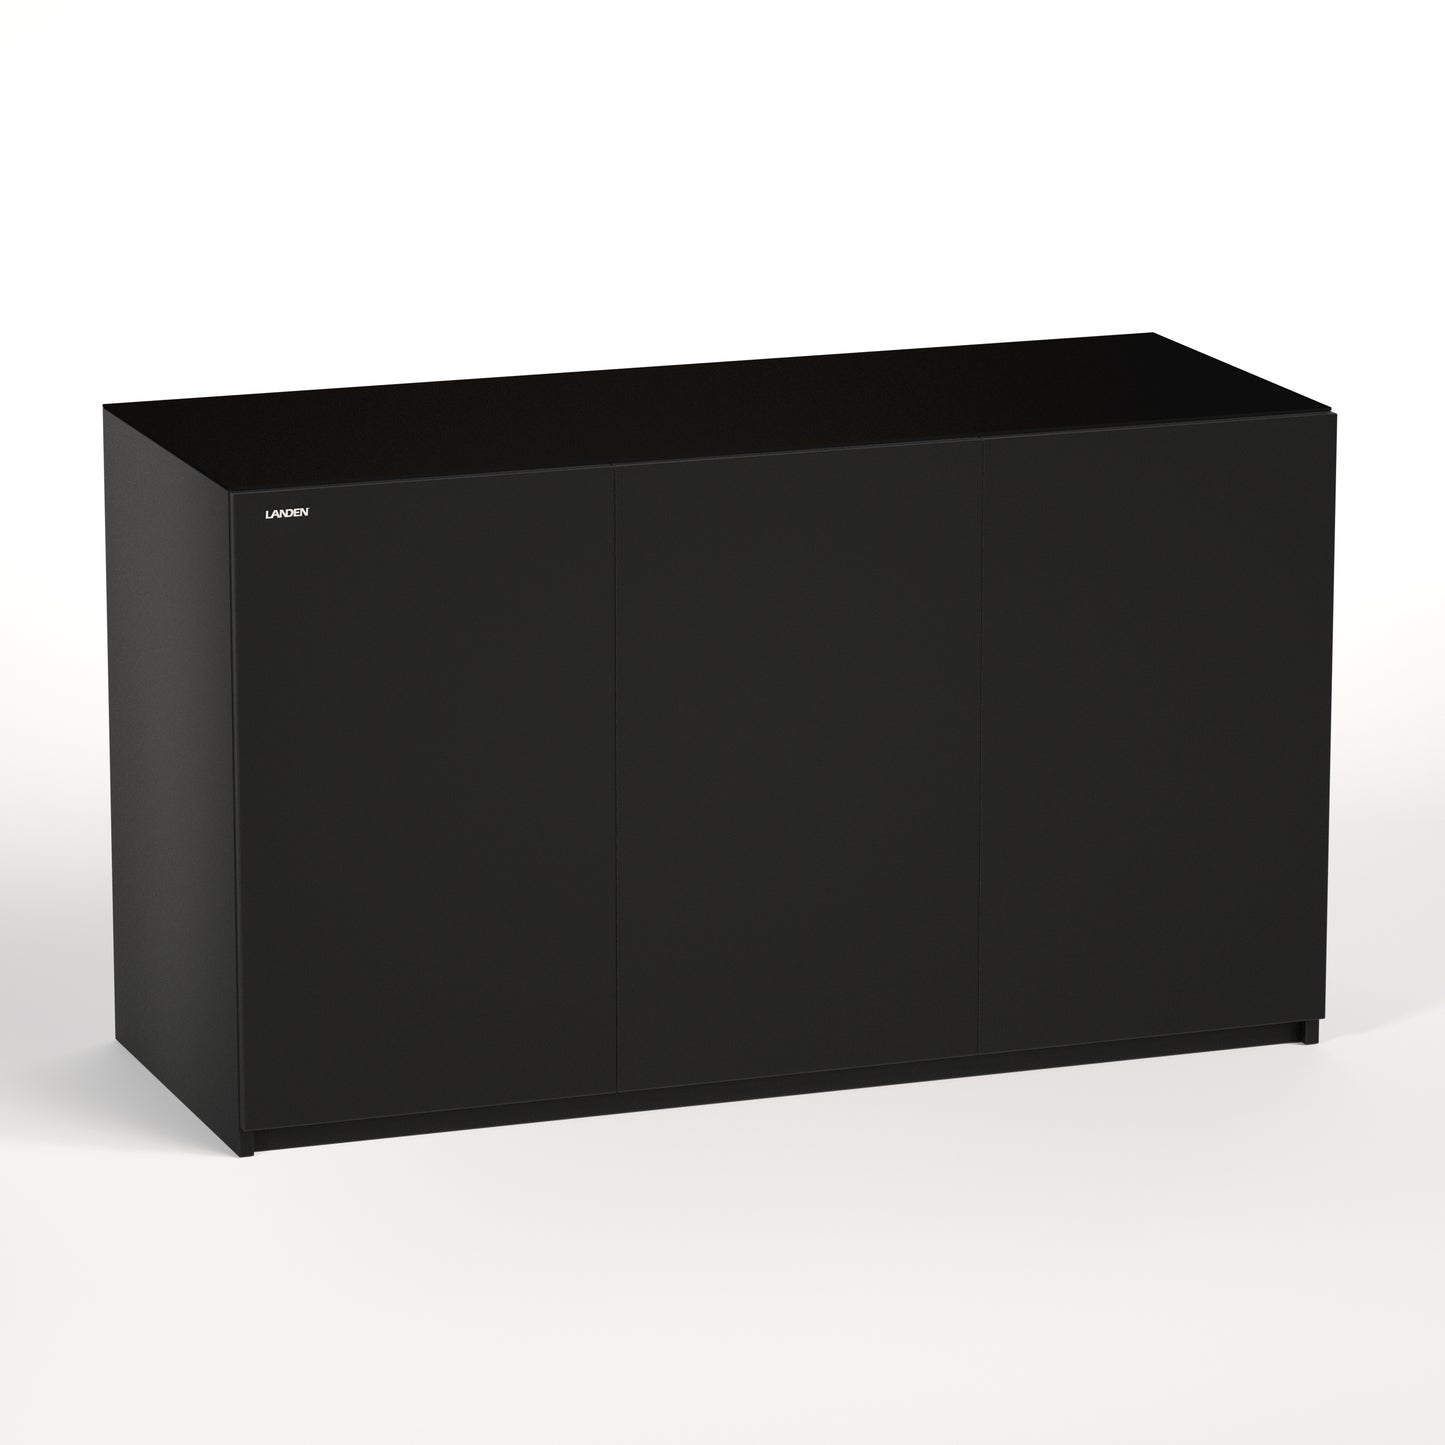 LANDEN Aquarium Stand and Cabinet, for up to 118 Gal Tank, Matte Black Painted(Stand Only) W59.06xD23.62xH33.86 in(150x60x86cm)